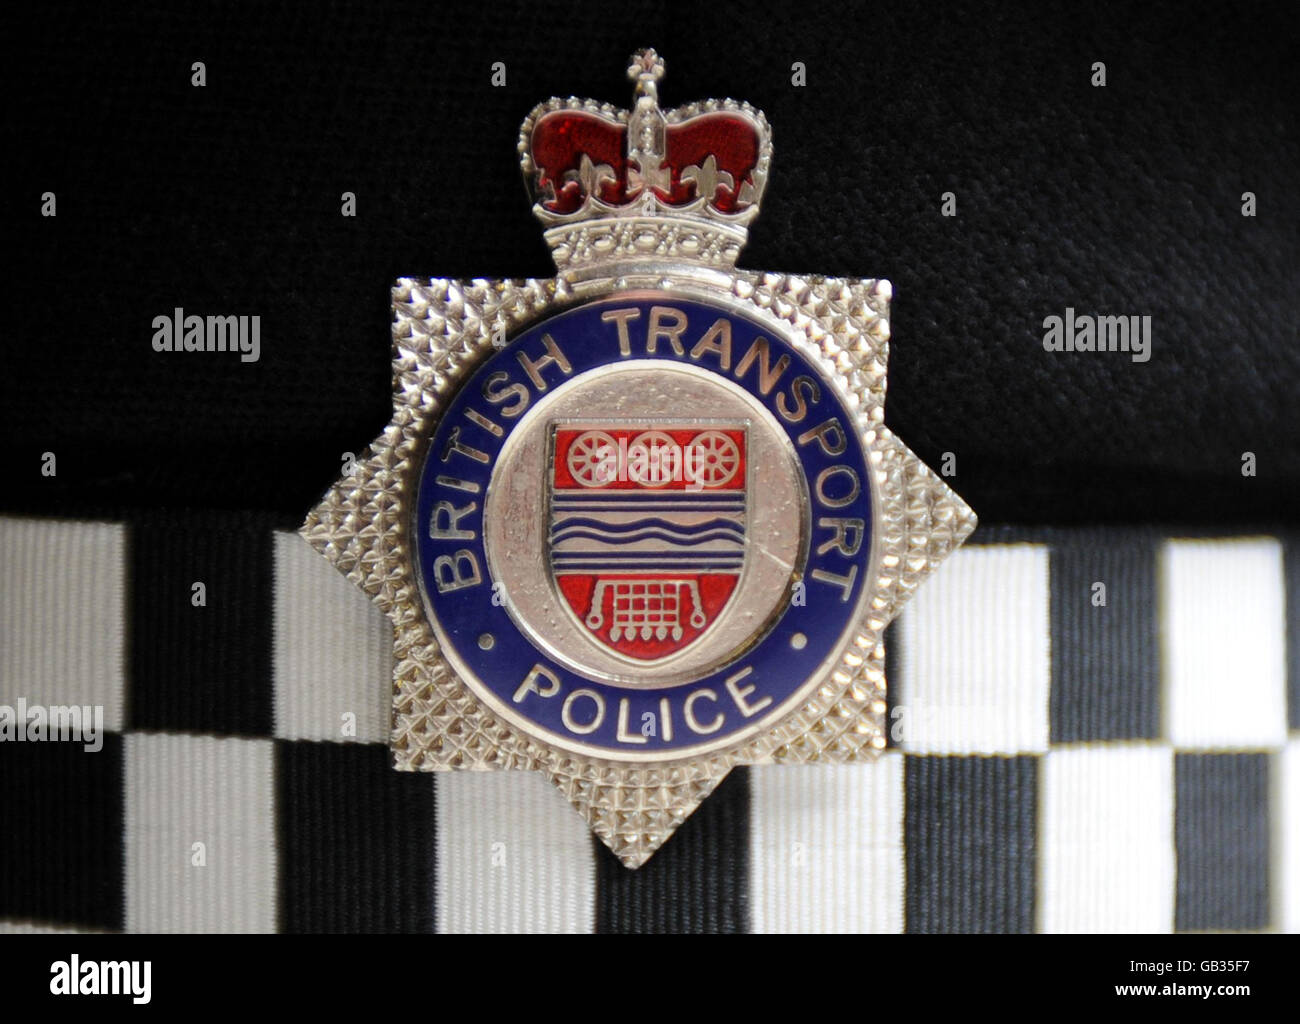 Generic stock. General view of a British Transport Police cap badge. Stock Photo